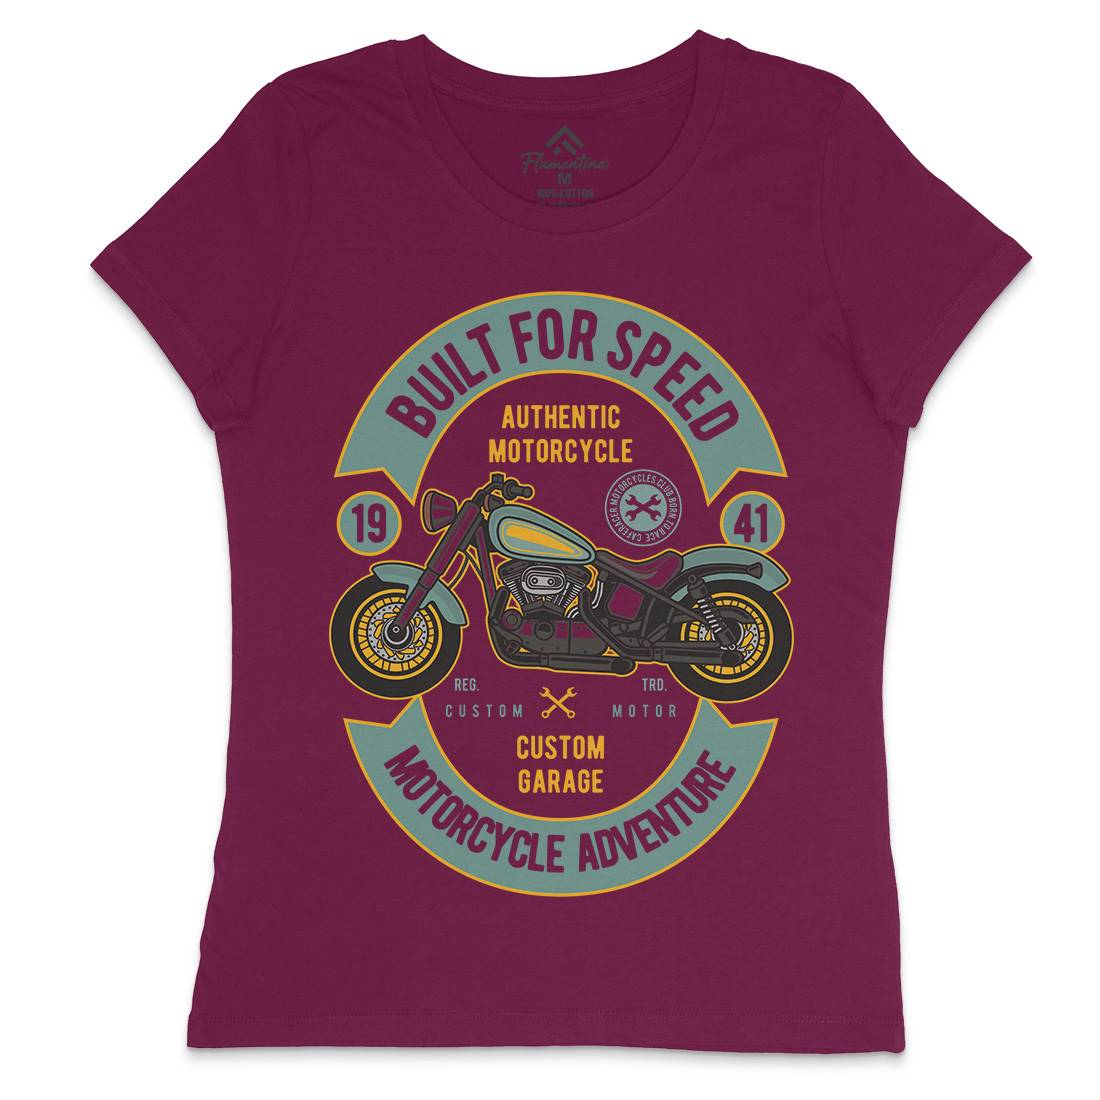 Built For Speed Womens Crew Neck T-Shirt Motorcycles D512